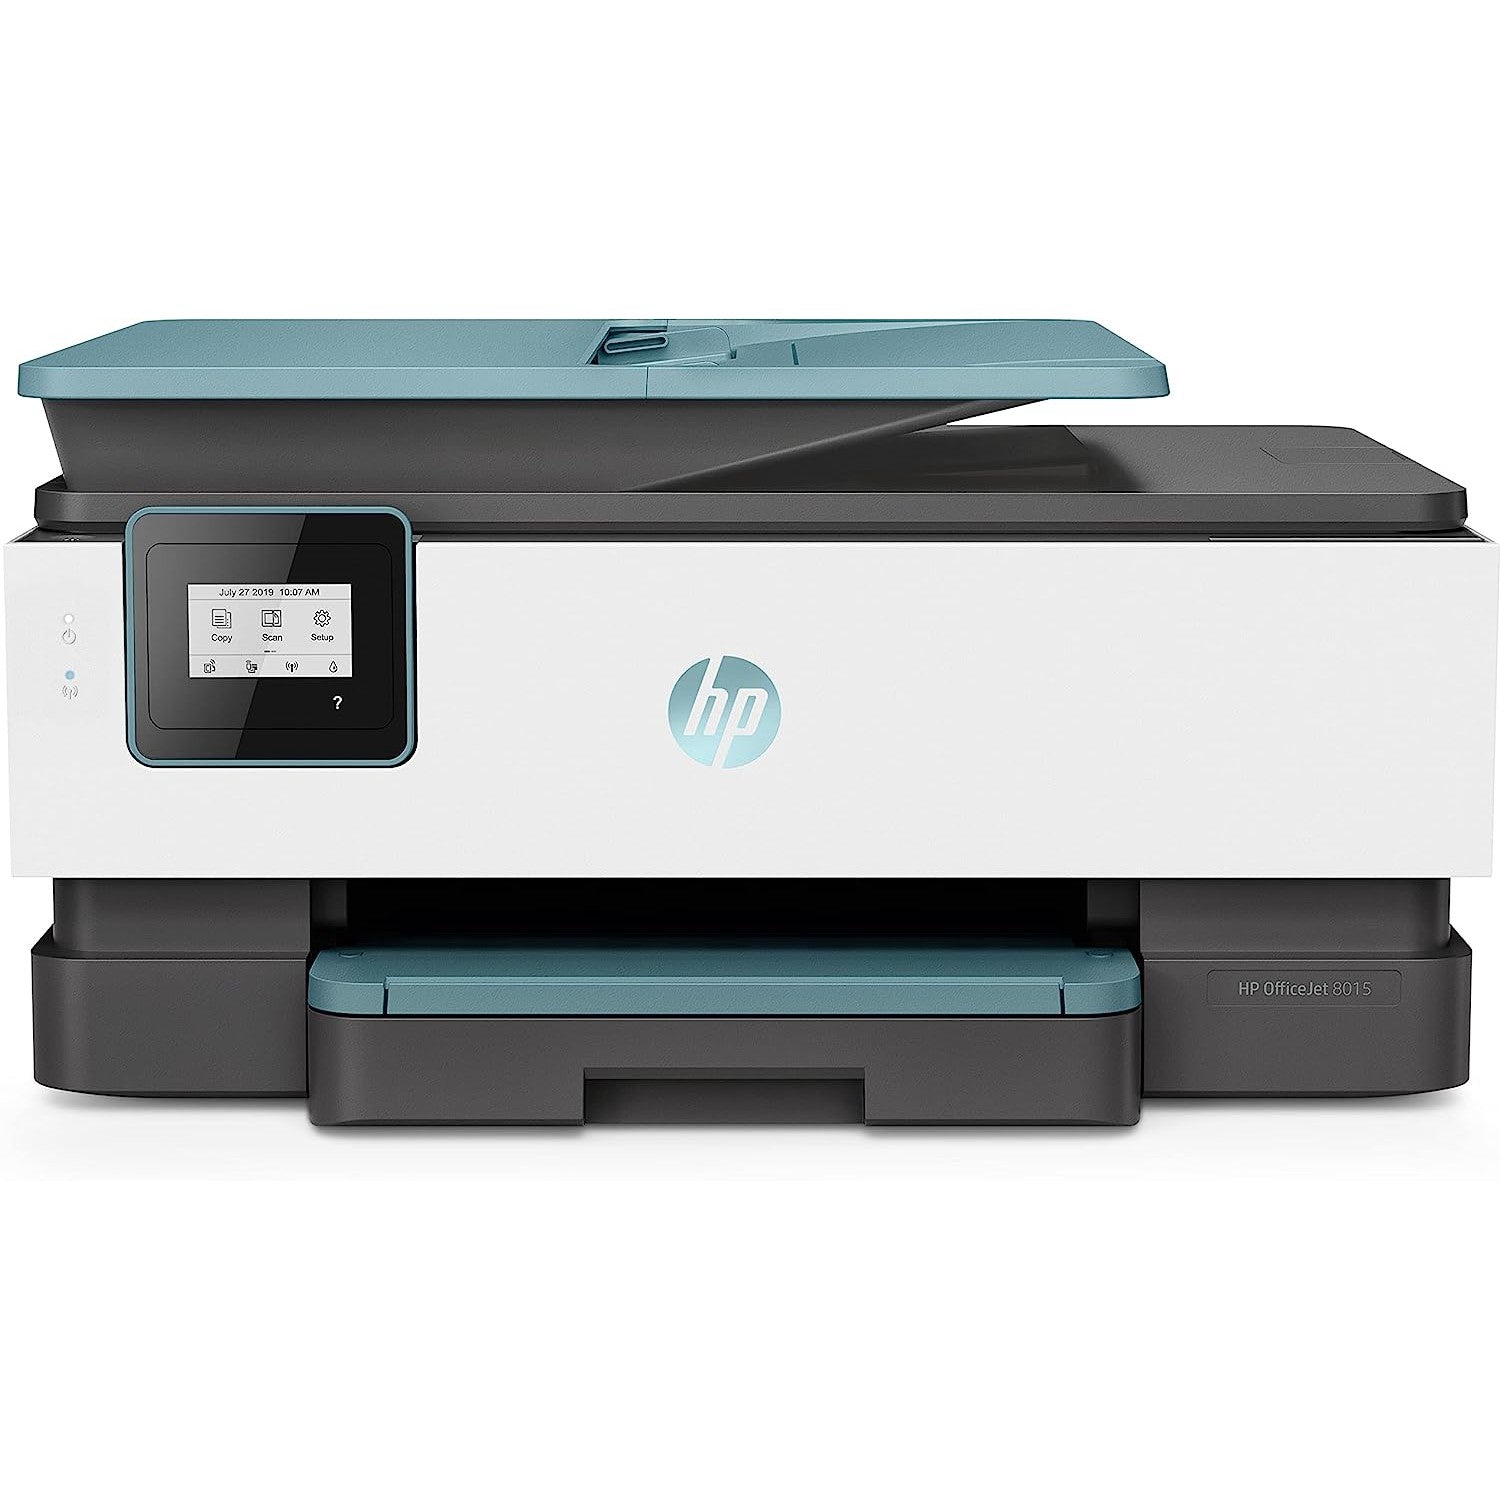 HP OfficeJet 8015 Colour Inkjet Wireless All-in-One Printer - Refurbished Excellent